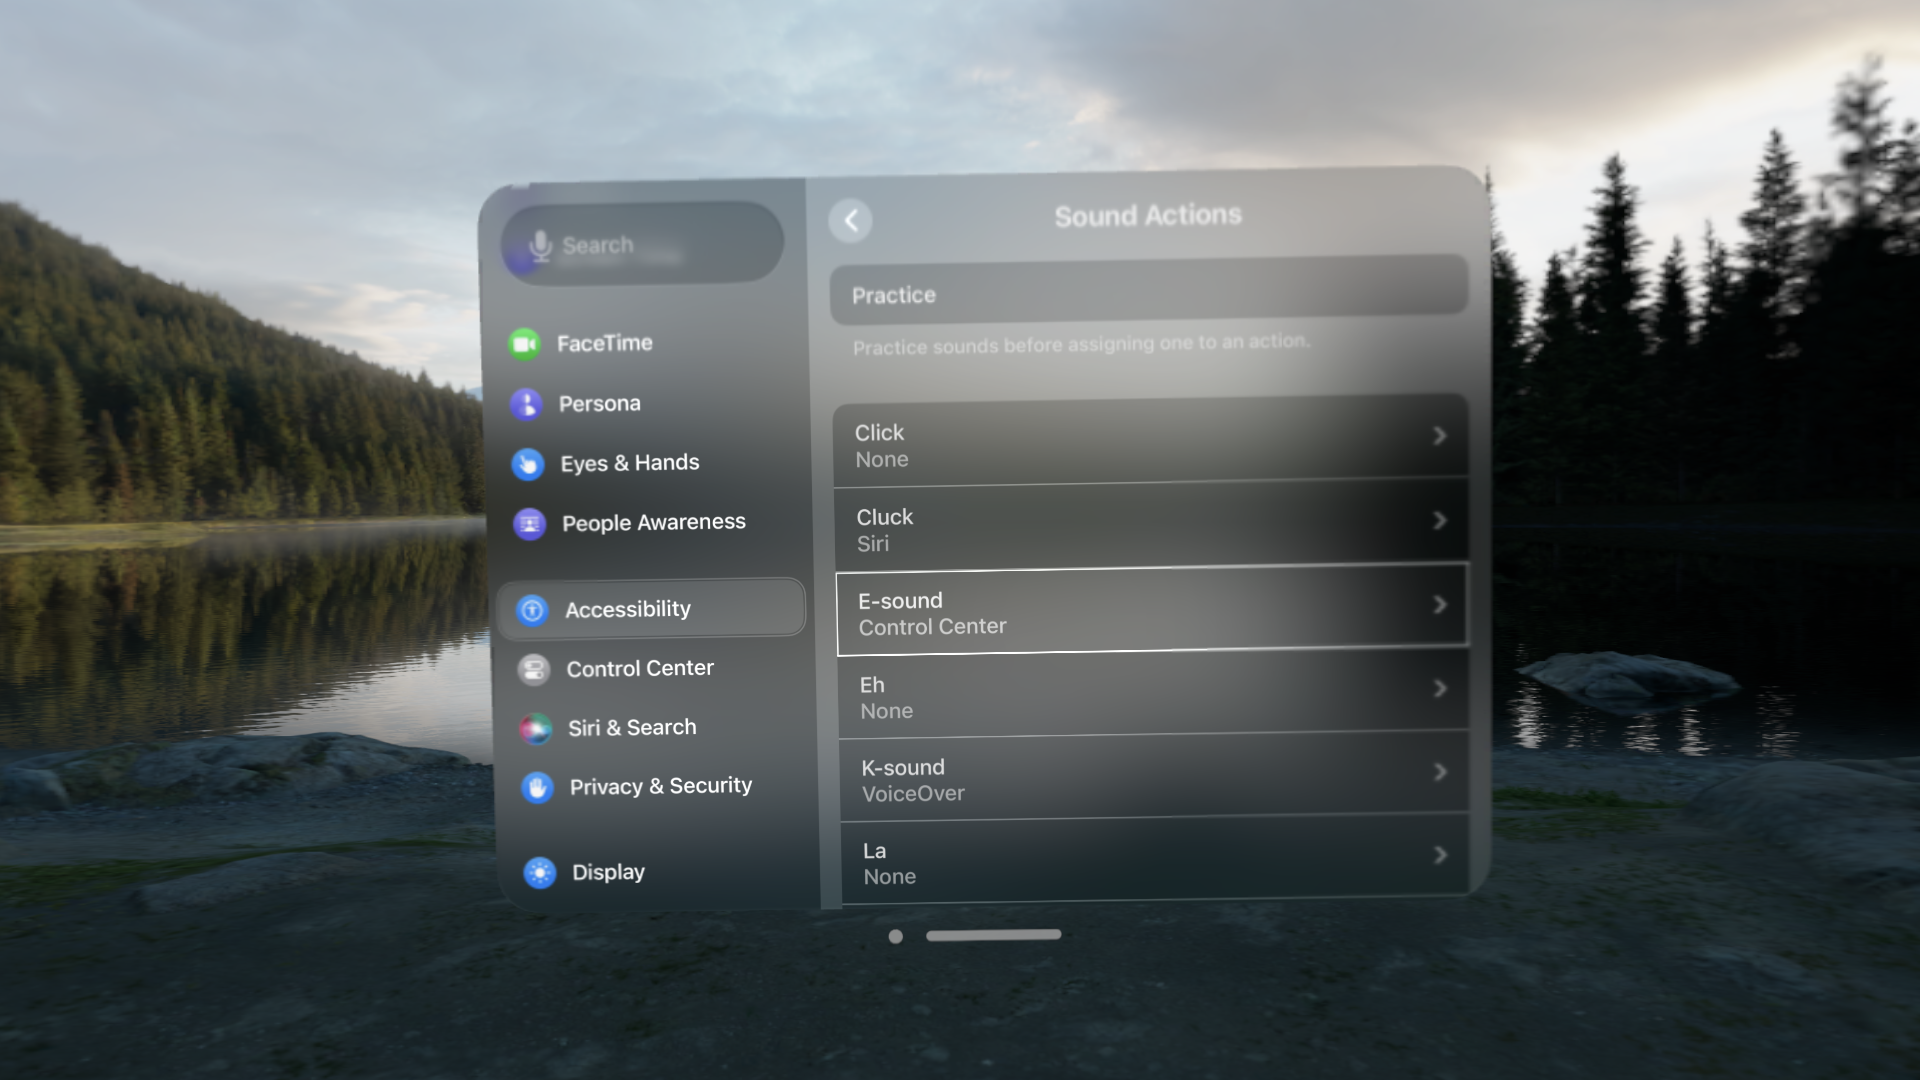 A screenshot of the sound actions settings. A practice button is available at the top. Below it are a list of many different sounds and their current assigned actions. Click has none. Cluck has Siri. E-sound has Control Center. Eh has none. K-sound has VoiceOver. La has none. More sounds are available to assign actions to below those visible in the scrollable list.